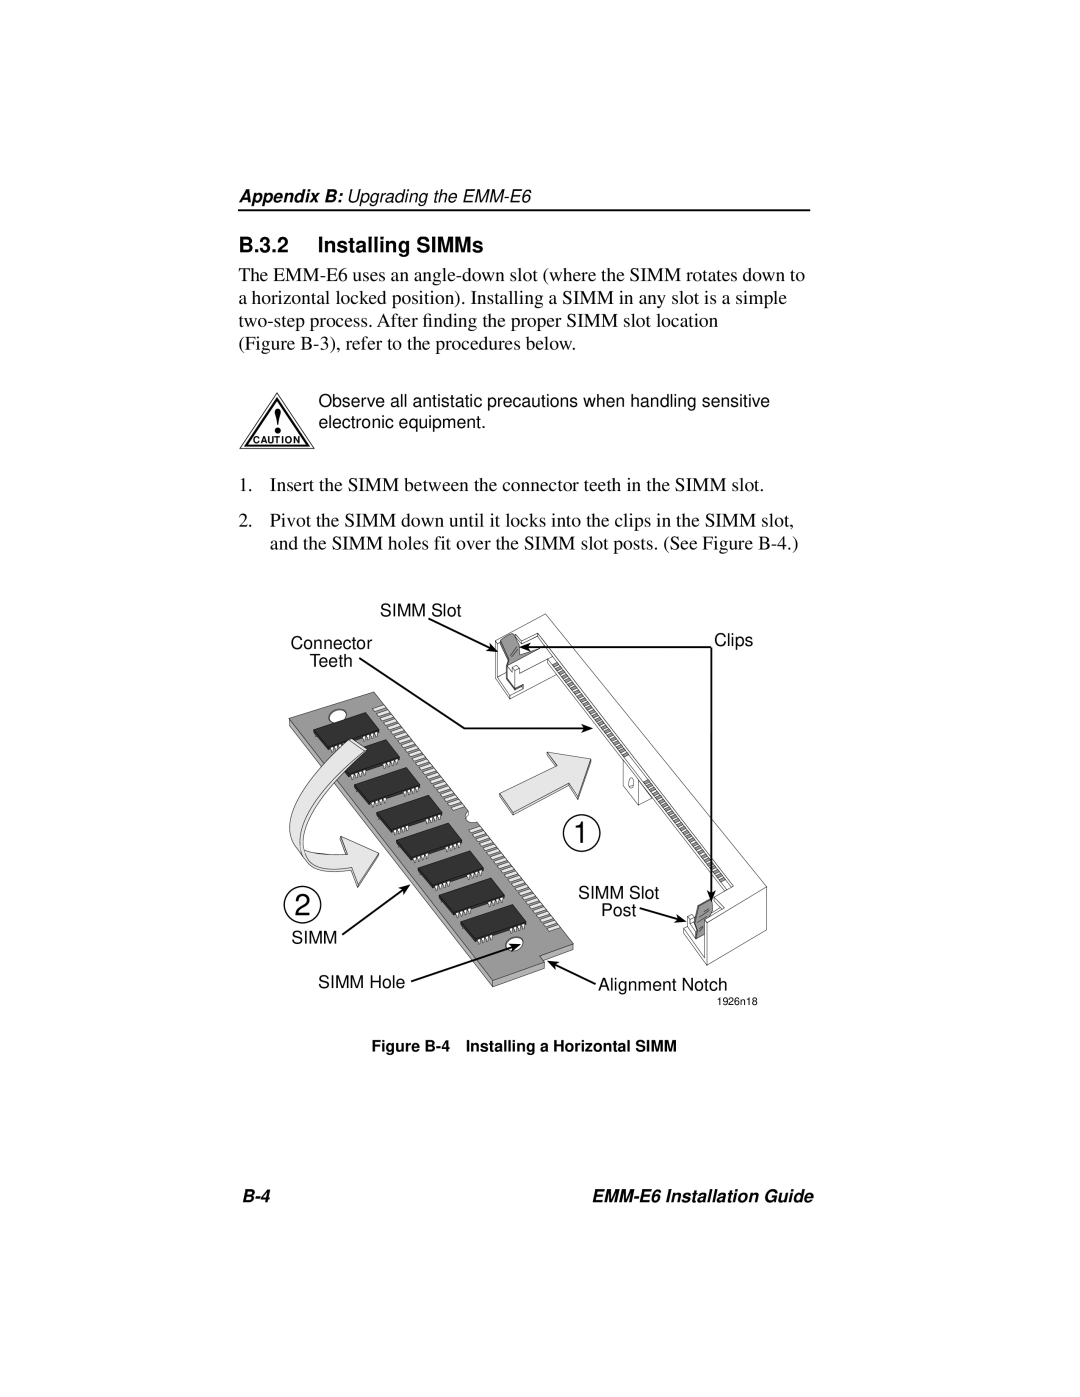 Cabletron Systems EMM-E6 manual B.3.2 Installing SIMMs 